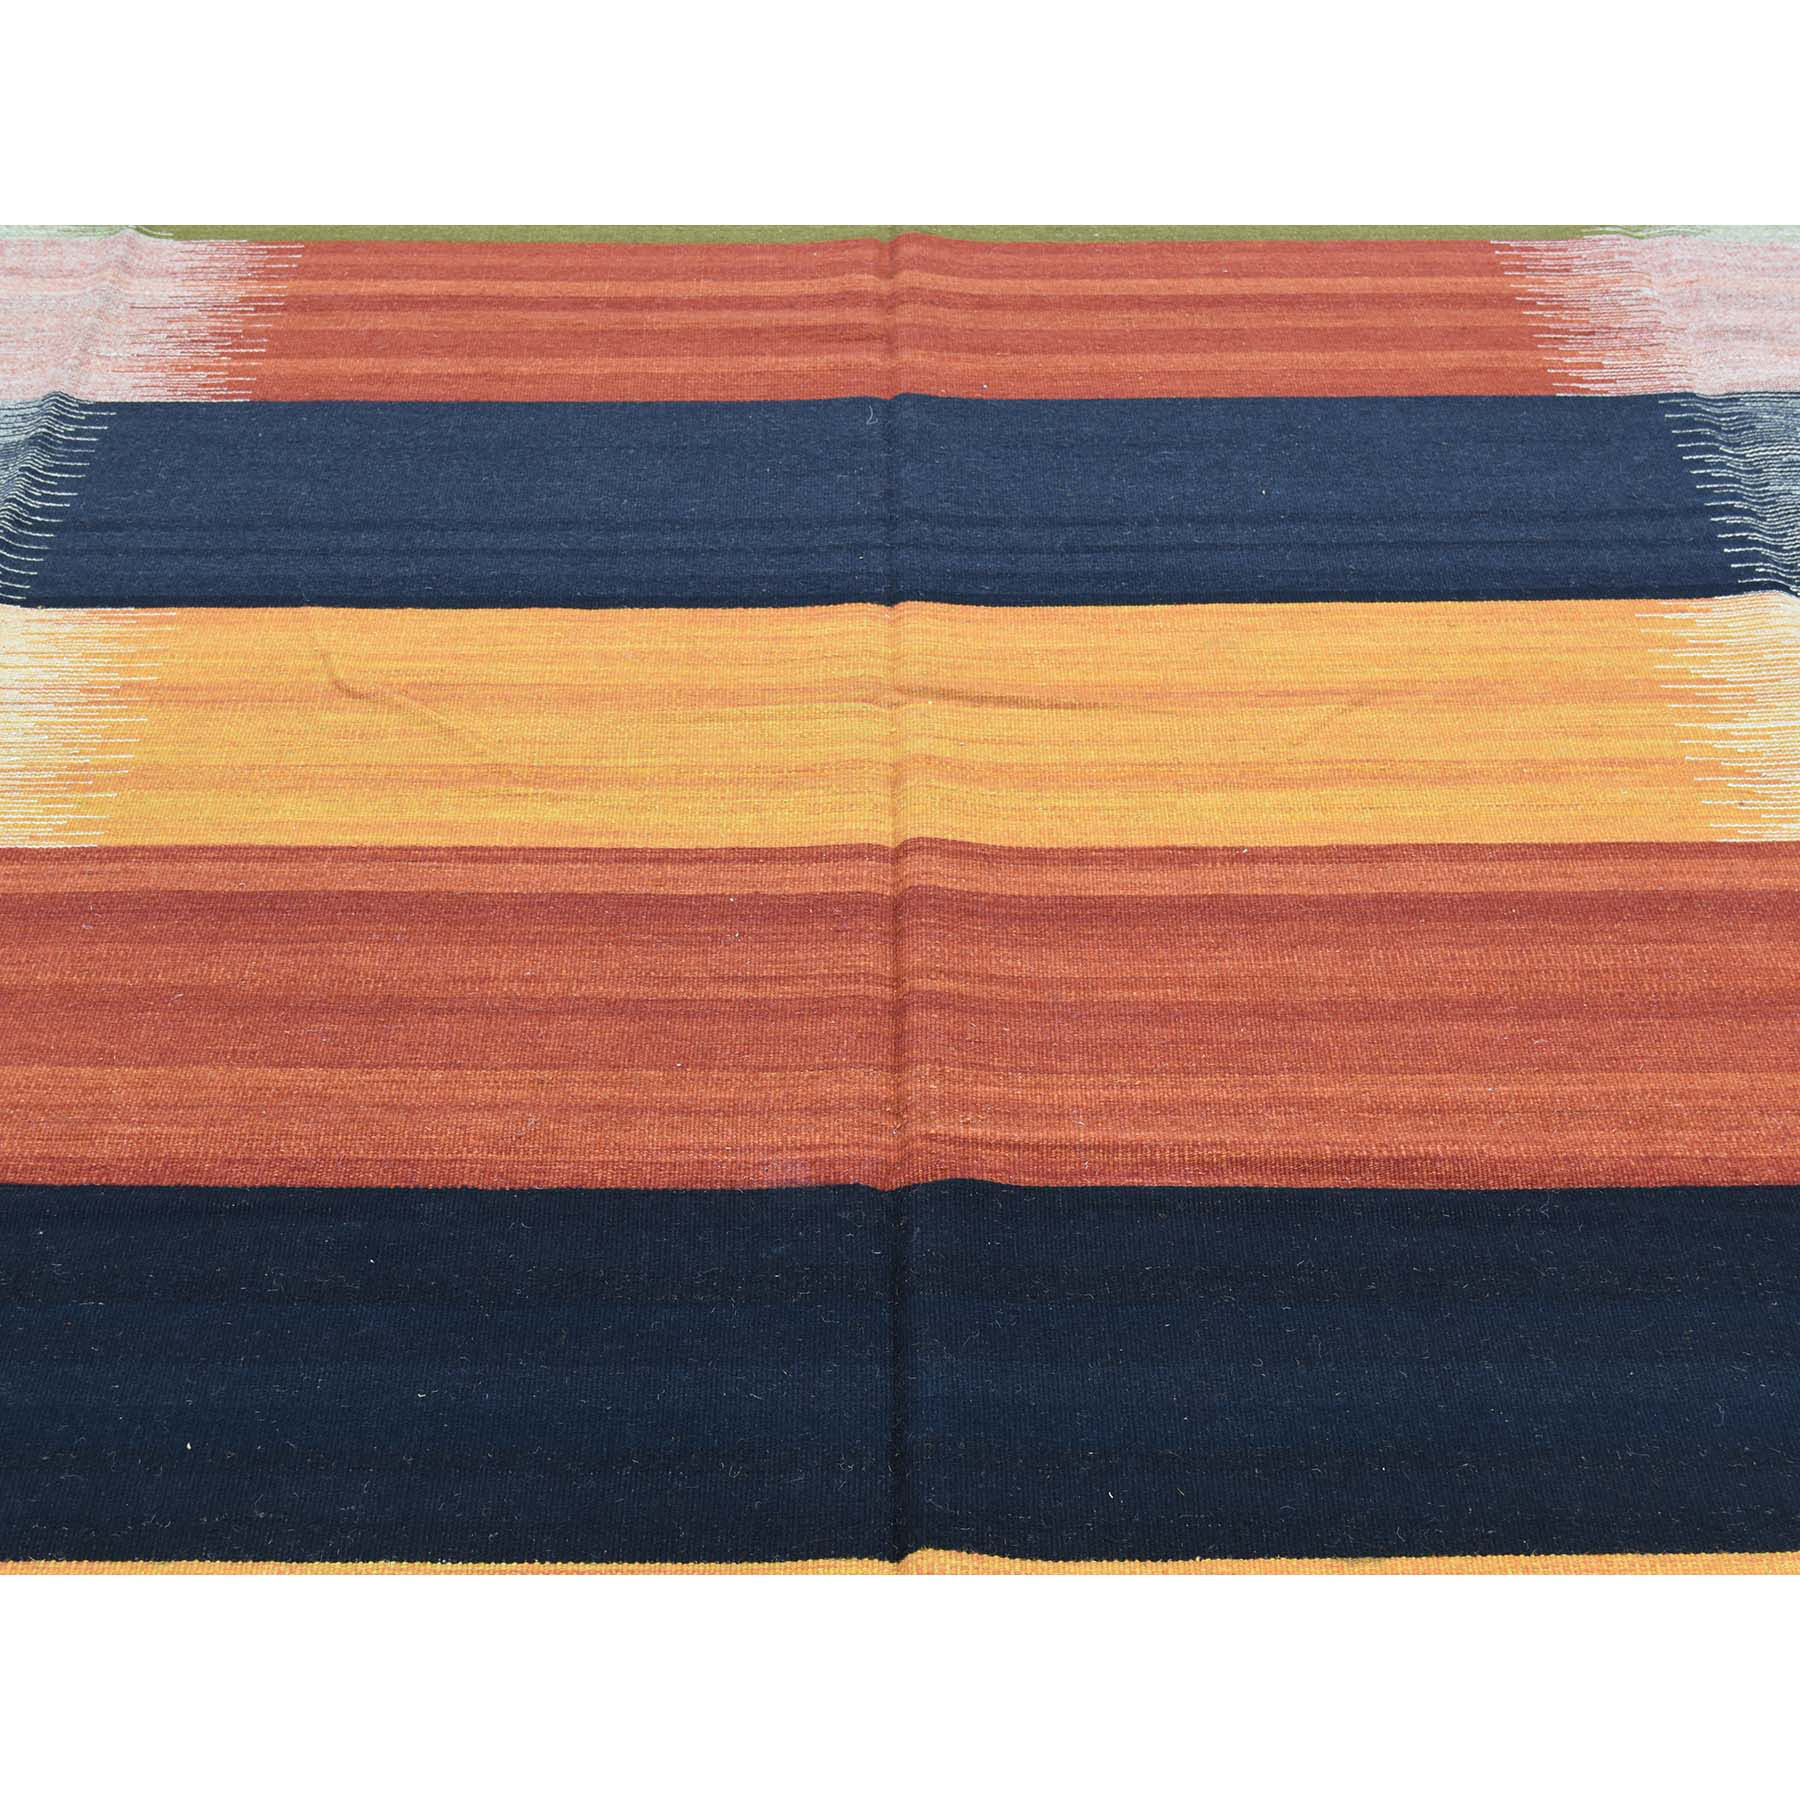 9-x12-6  Hand-Woven Colorful Flat Weave Reversible Durie Kilim Carpet 